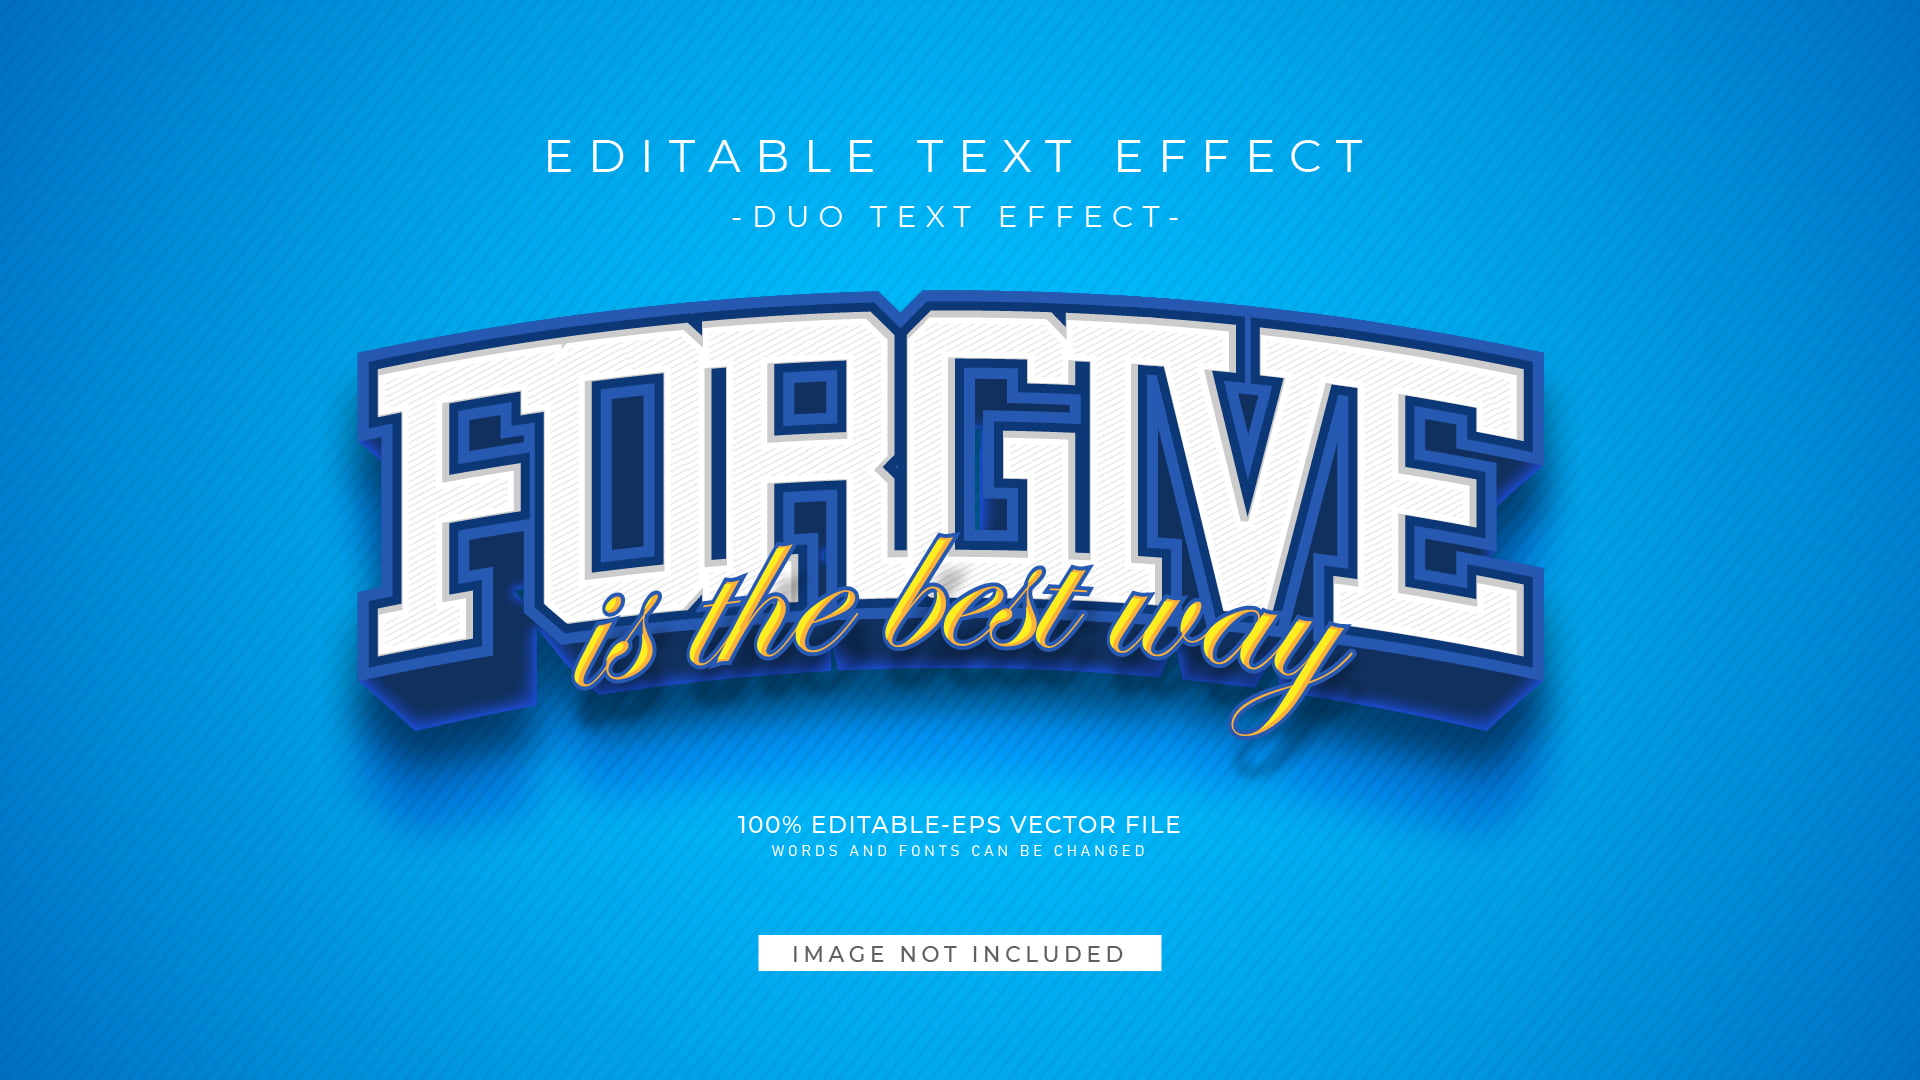 Free Vector  Hello stylish text effect editable modern lettering